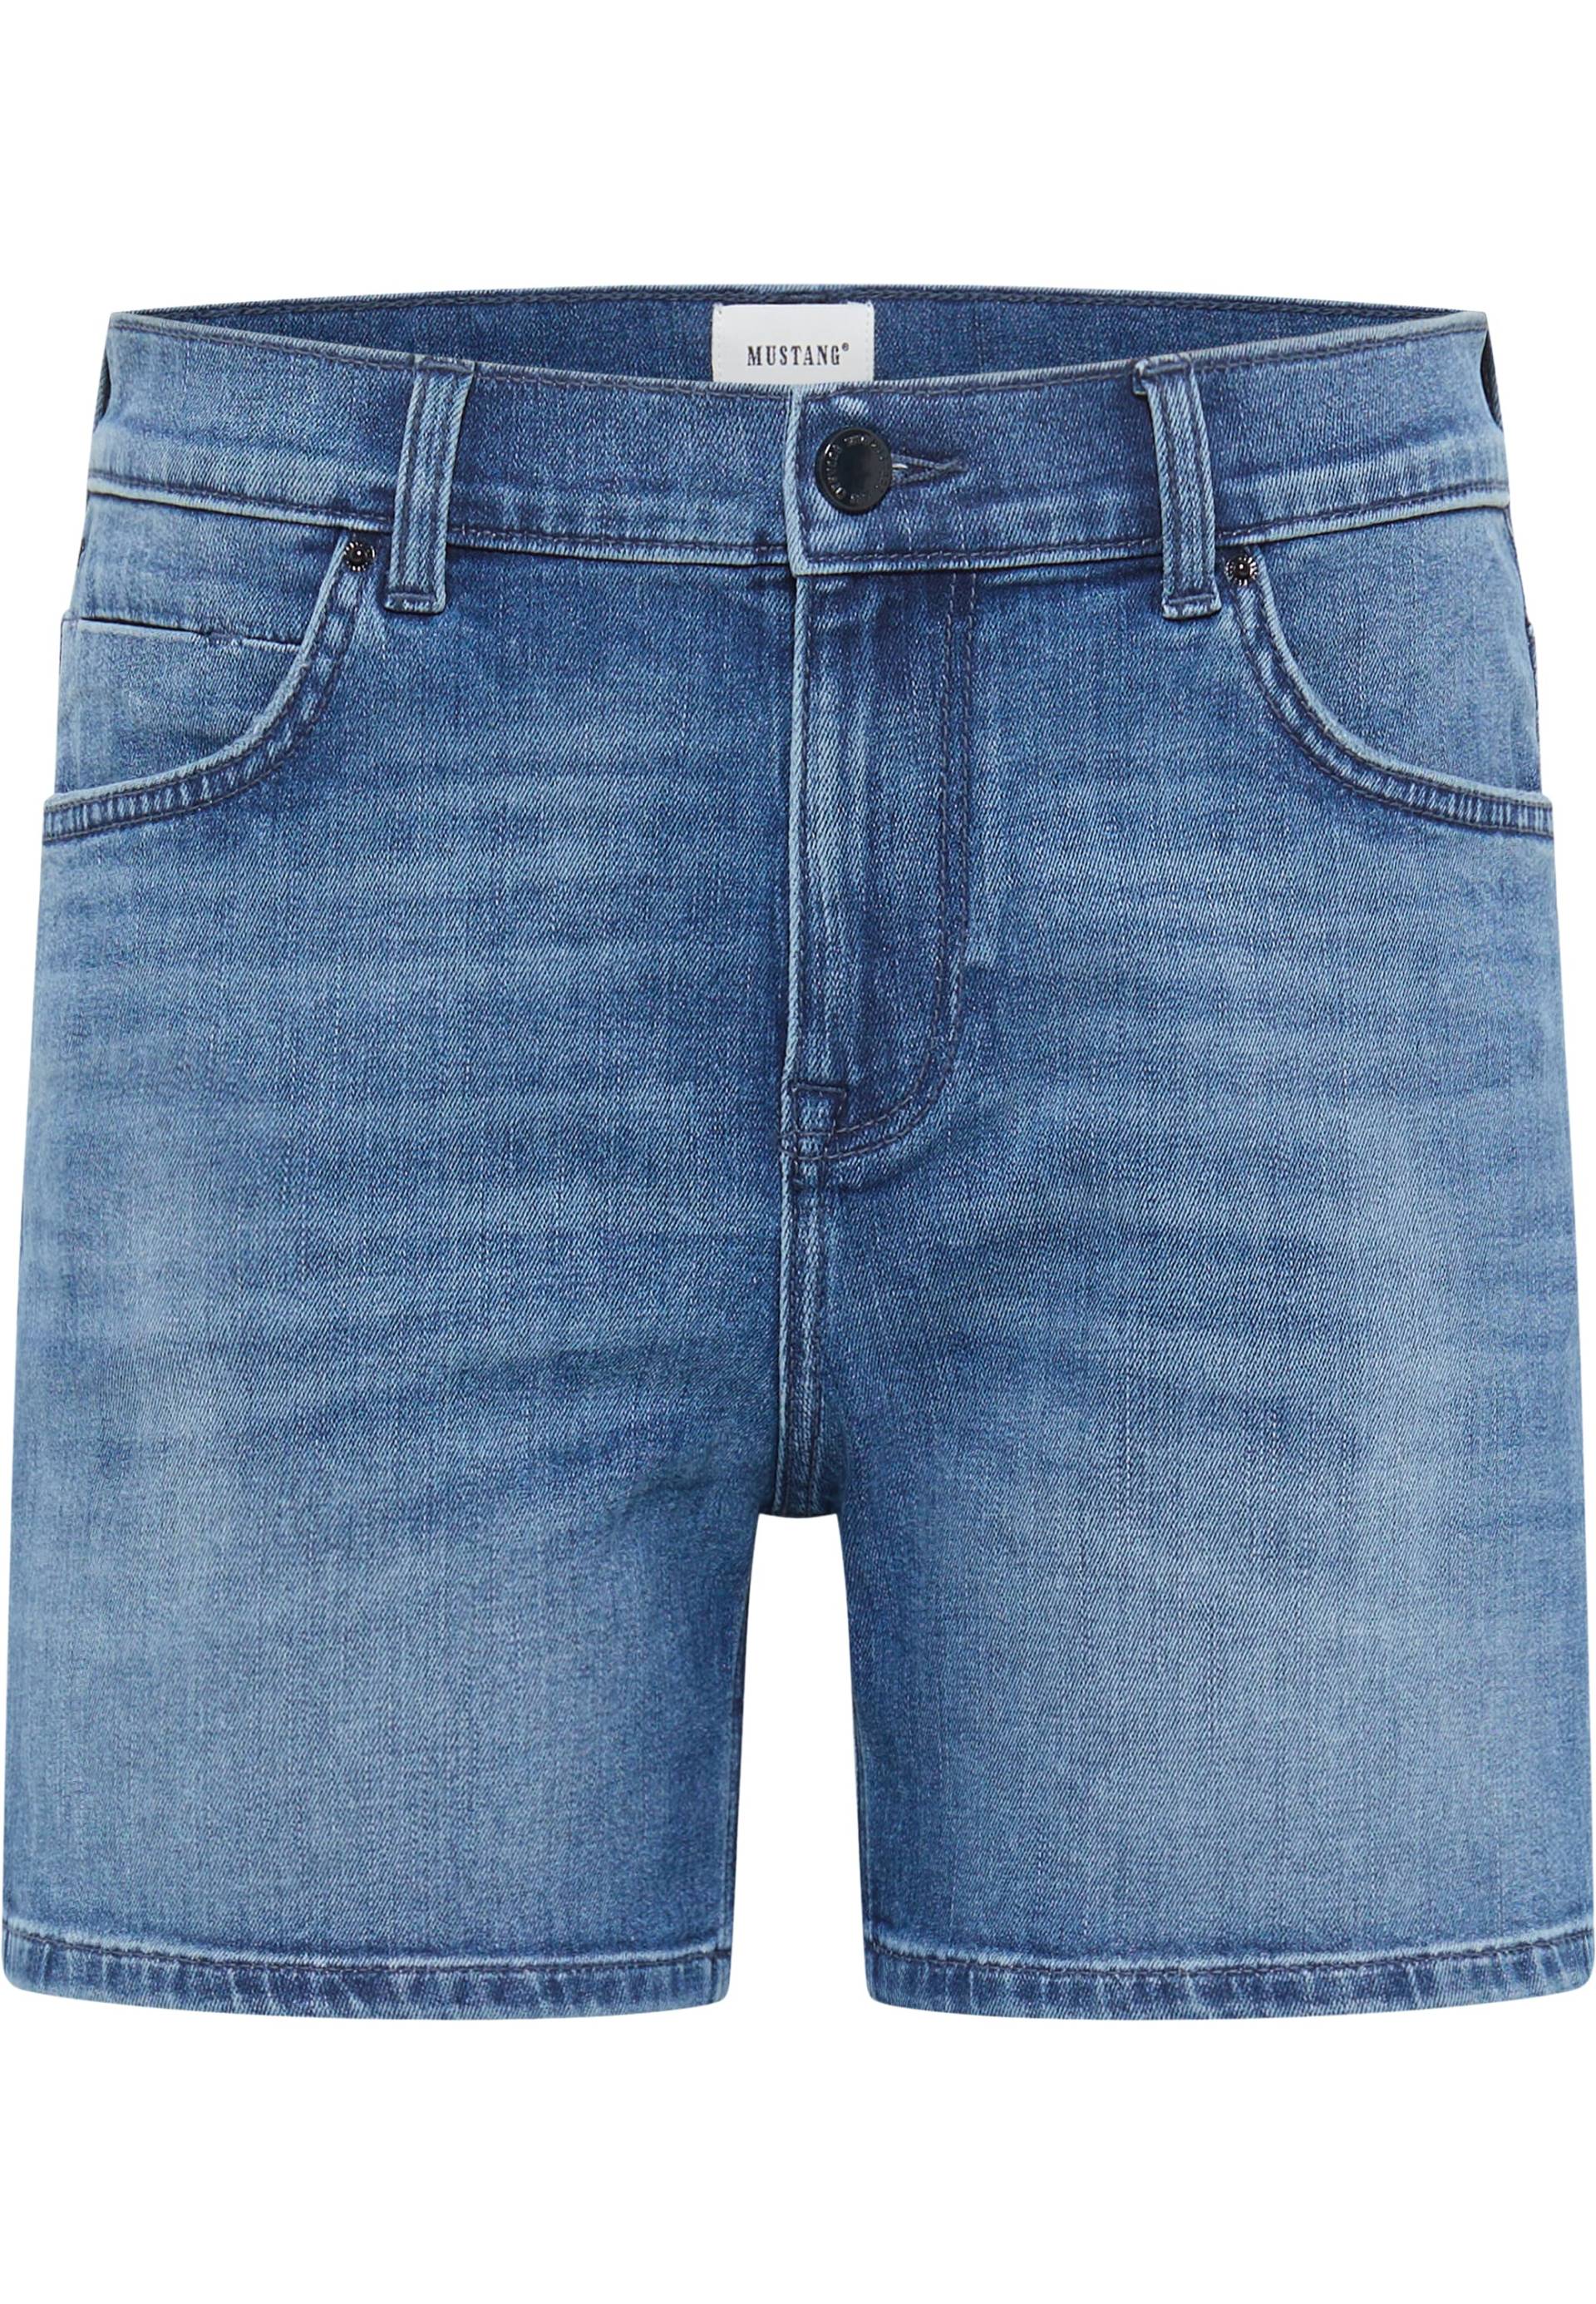 MUSTANG Shorts »Style Jodie Shorts« von Mustang